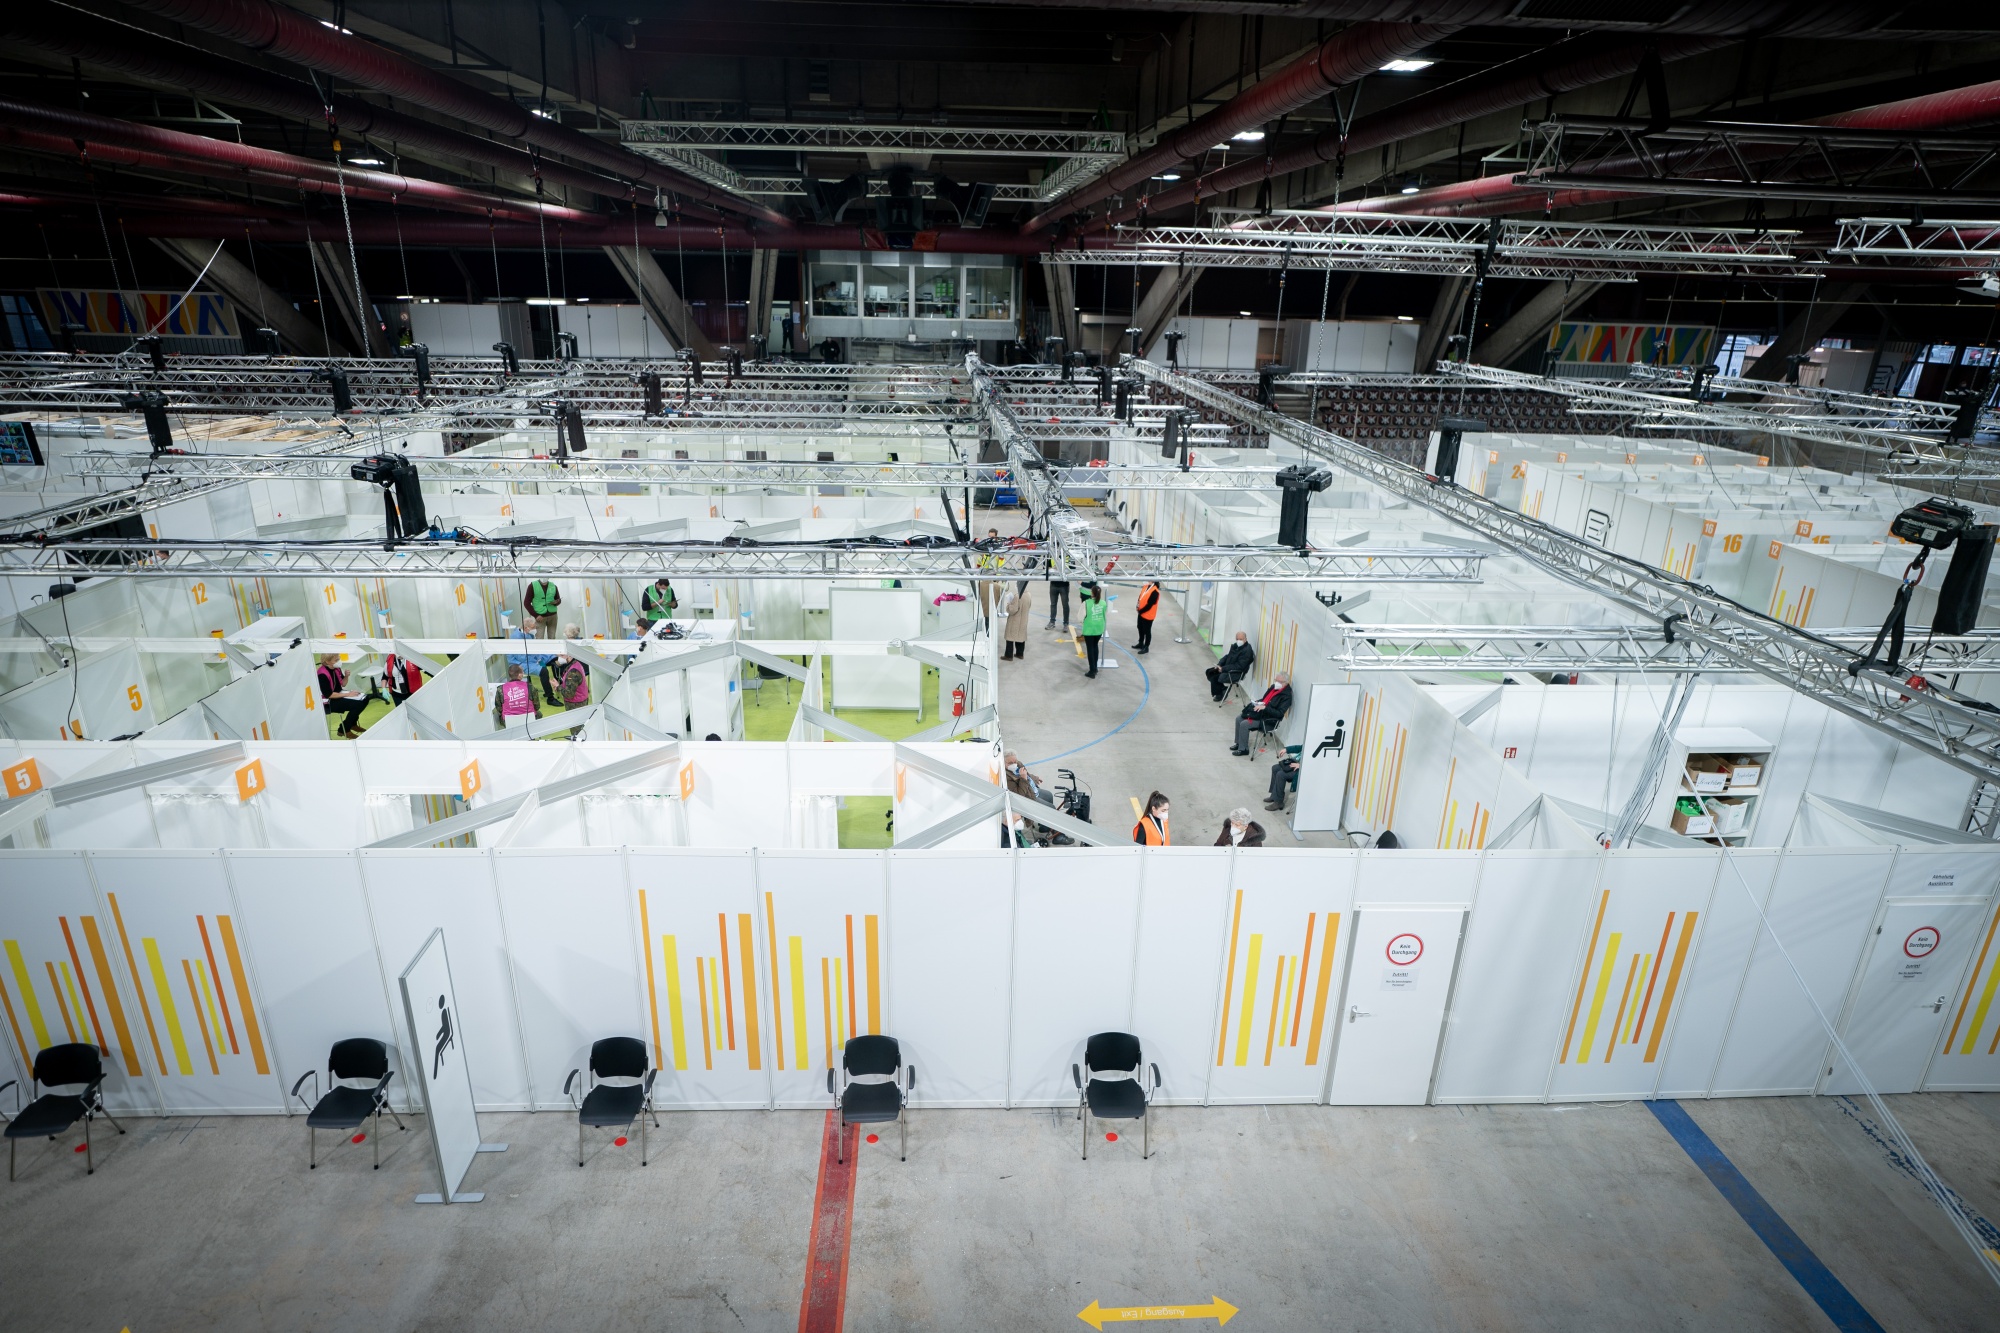 Berlin's Erika Hess Ice Stadium was transformed into a mass vaccination center in January.&nbsp;